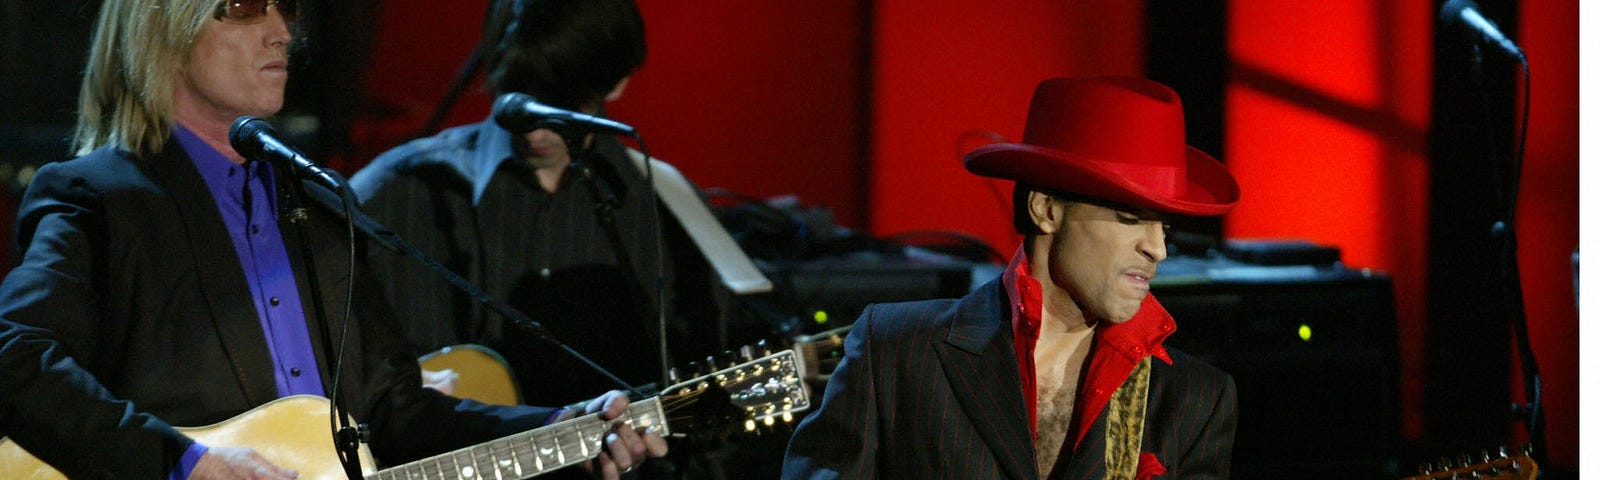 Prince performs along with Tom Petty at the 19th Annual Rock and Roll Hall of Fame Induction Ceremony in New York City, 2004.